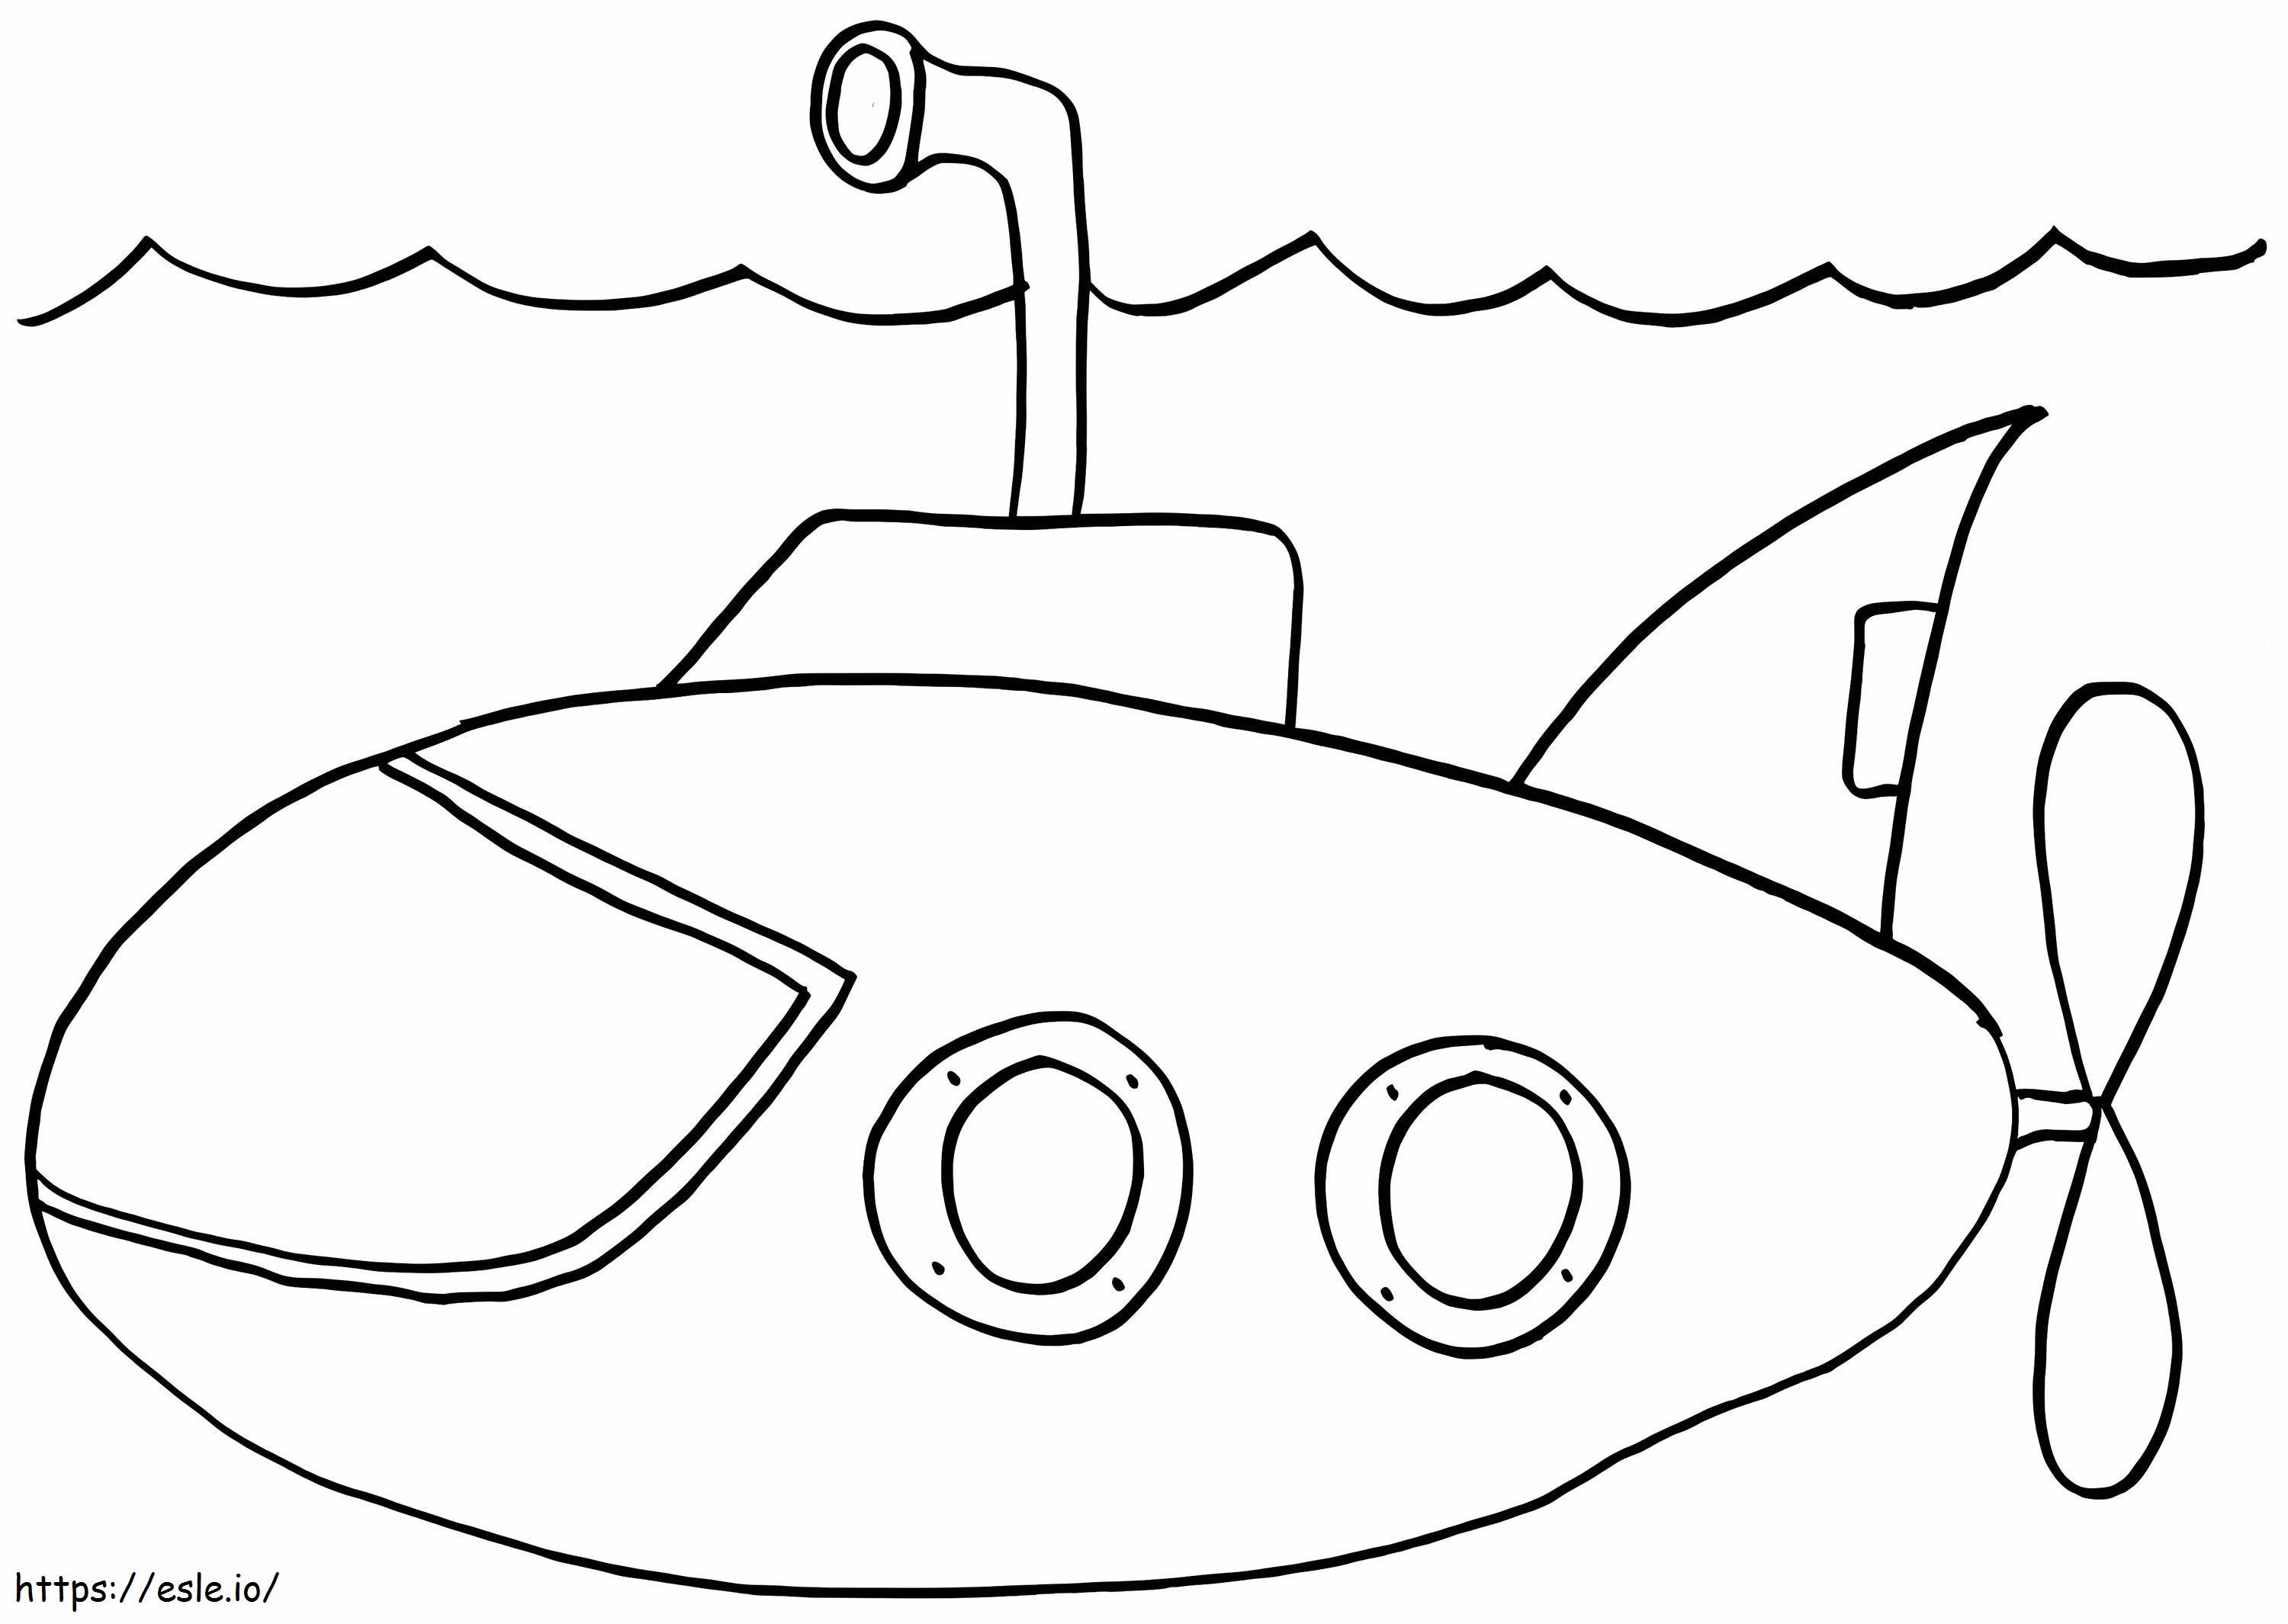 Simple Submarine coloring page